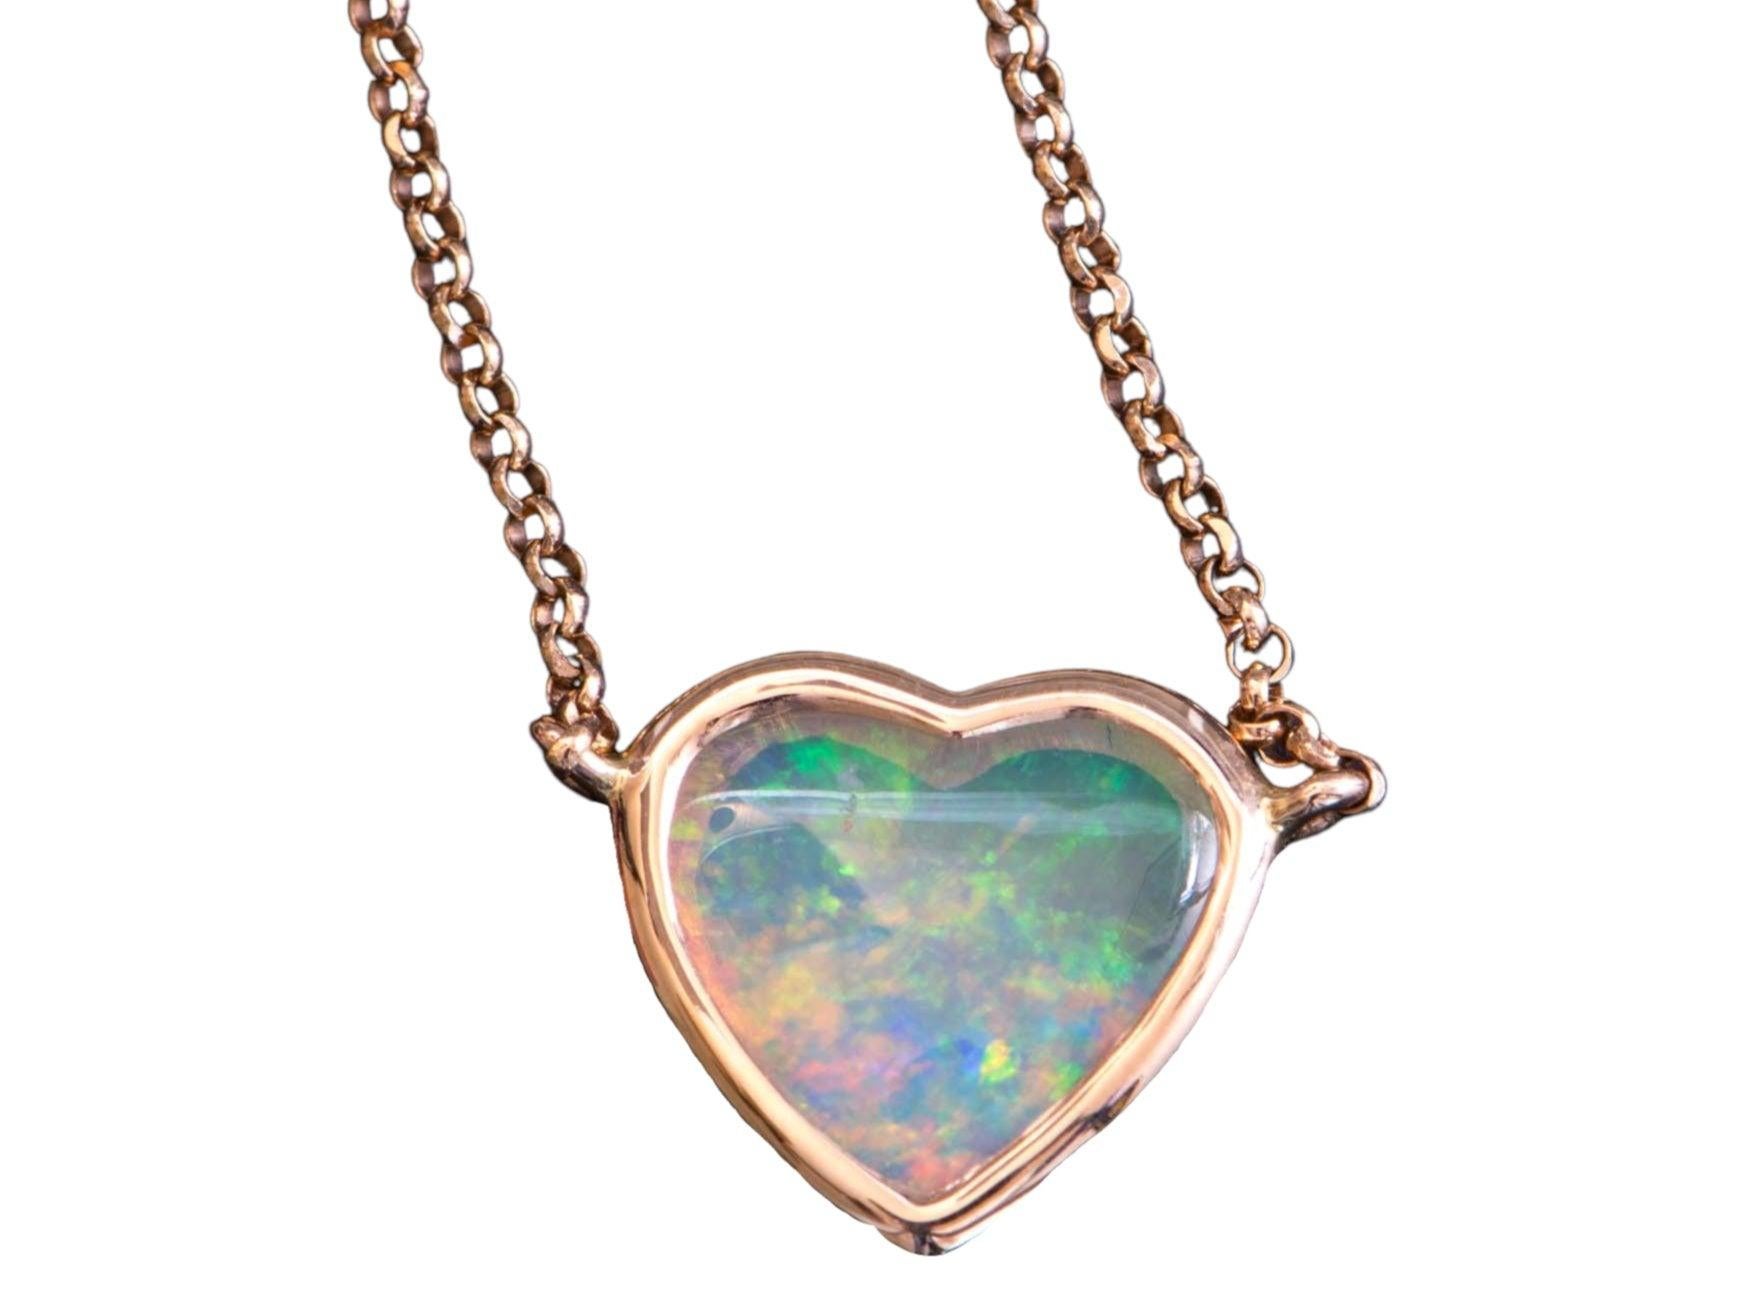 ♥ Heart-shape Solid Australian Crystal Opal Bezel Set Necklace 14K Rose Gold Pendant

♥ Solid 14k rose gold pendant set with a beautiful -shaped
♥ Gorgeous color!
♥ The item measures 10.2 mm in length, 9.7 mm in width, and stands 2.9 mm thick

♥